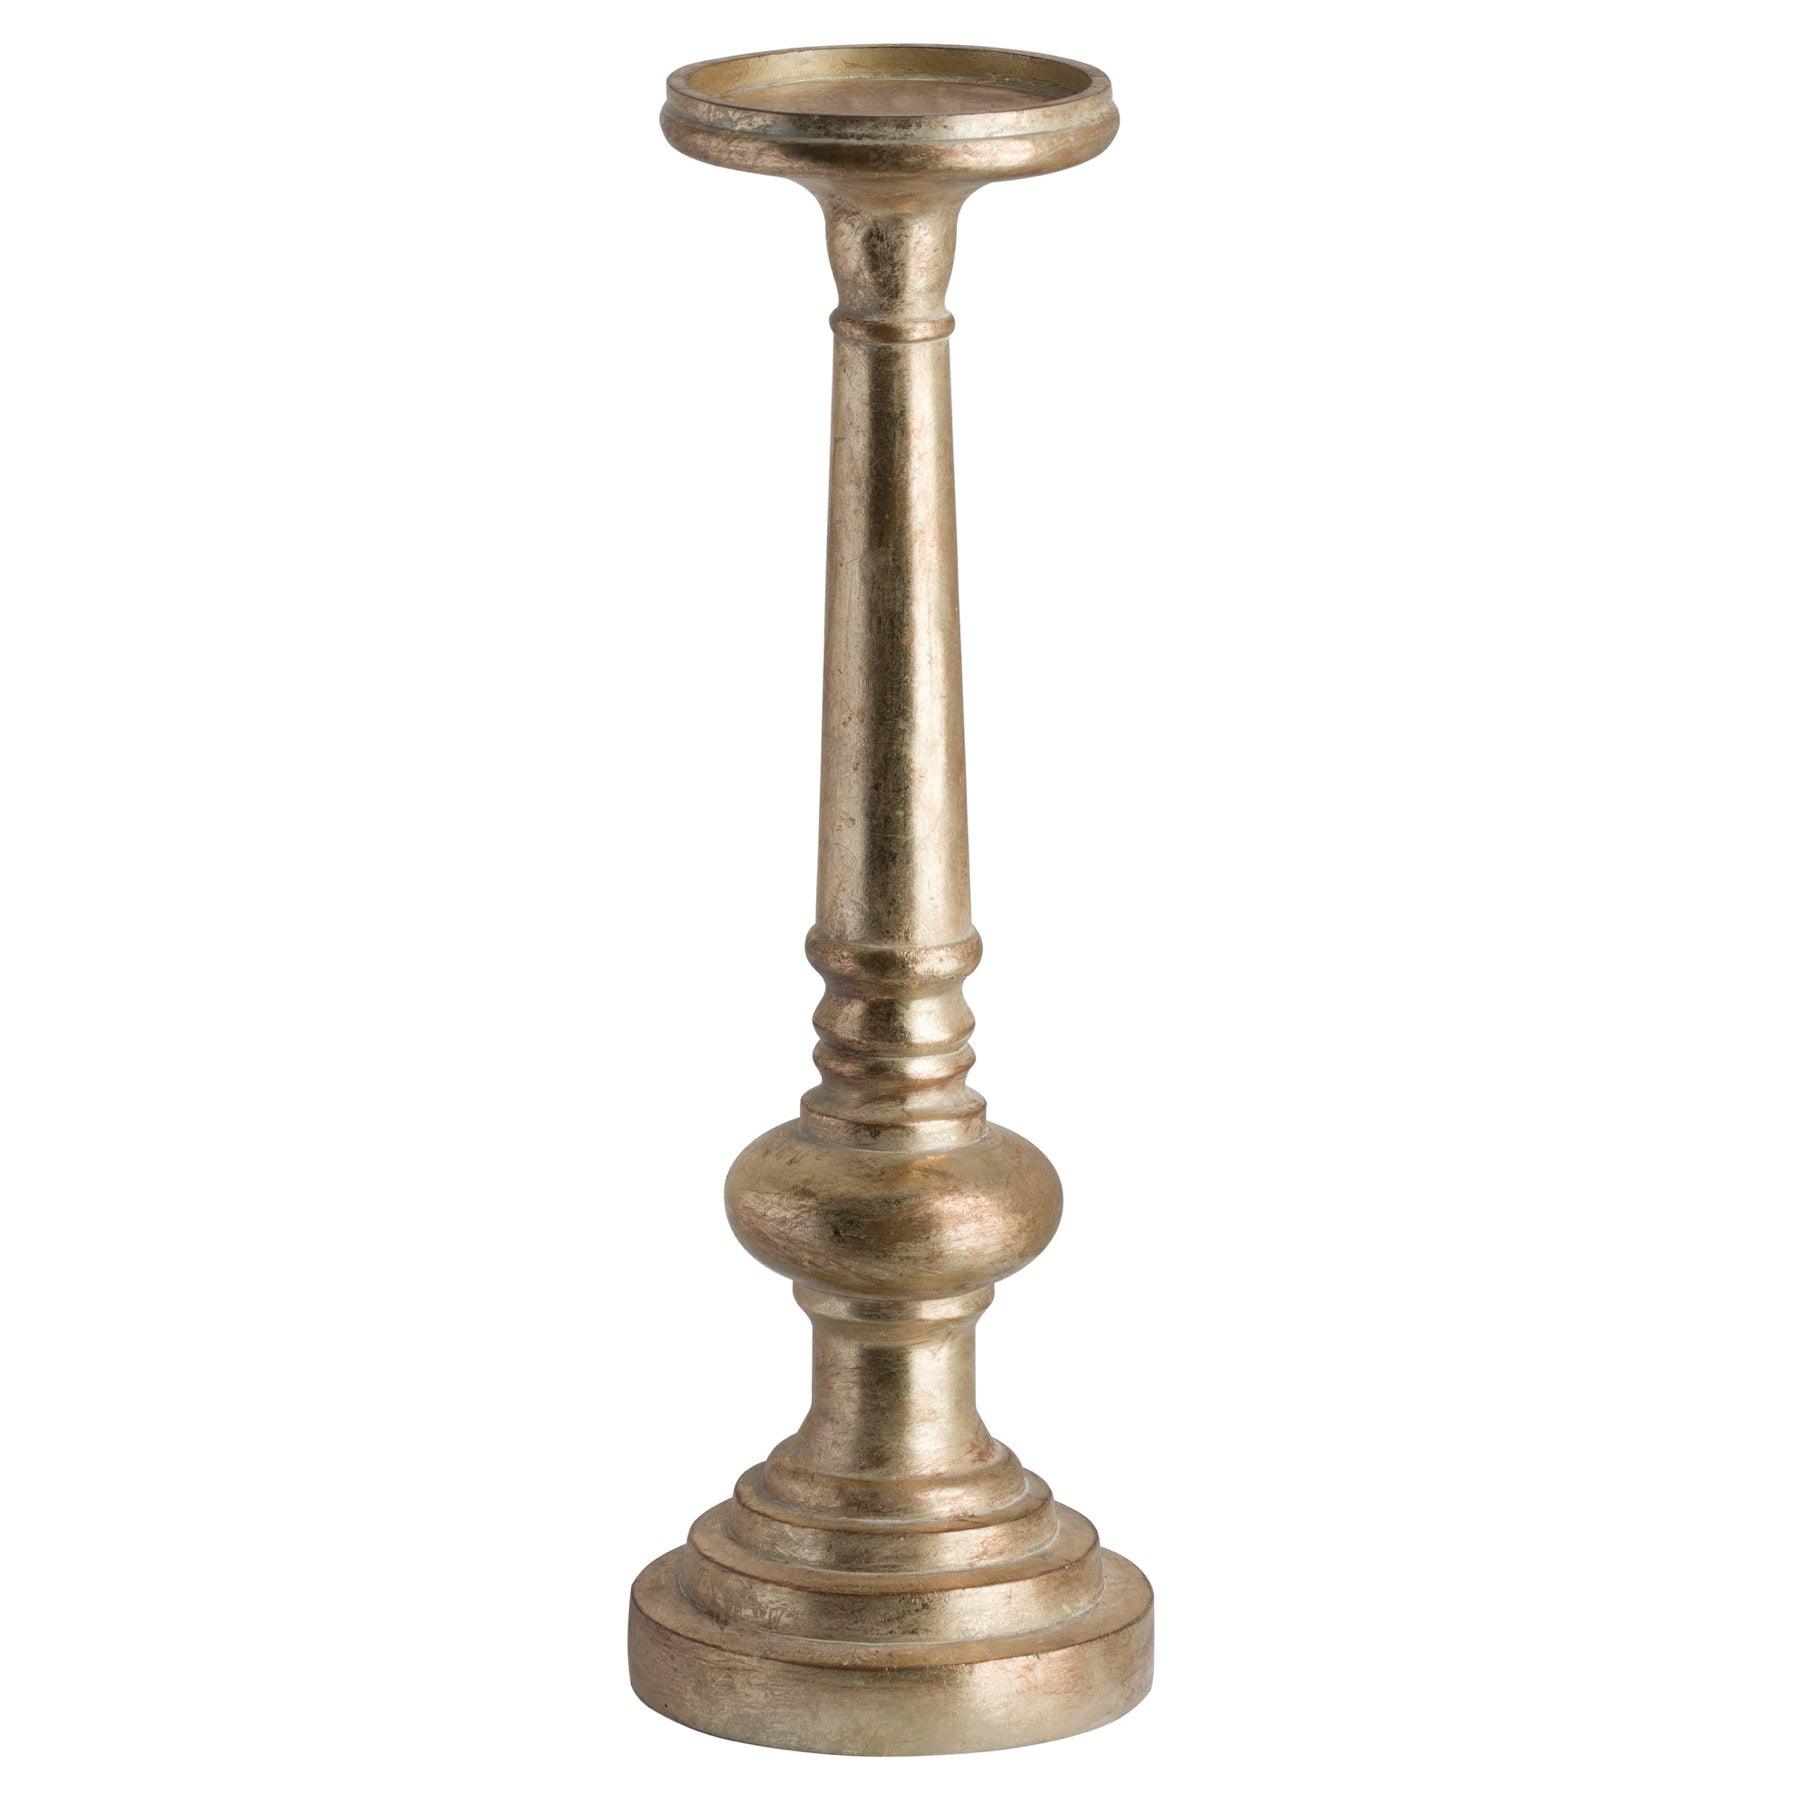 Antique Brass Effect Tall Candle Holder - Vookoo Lifestyle